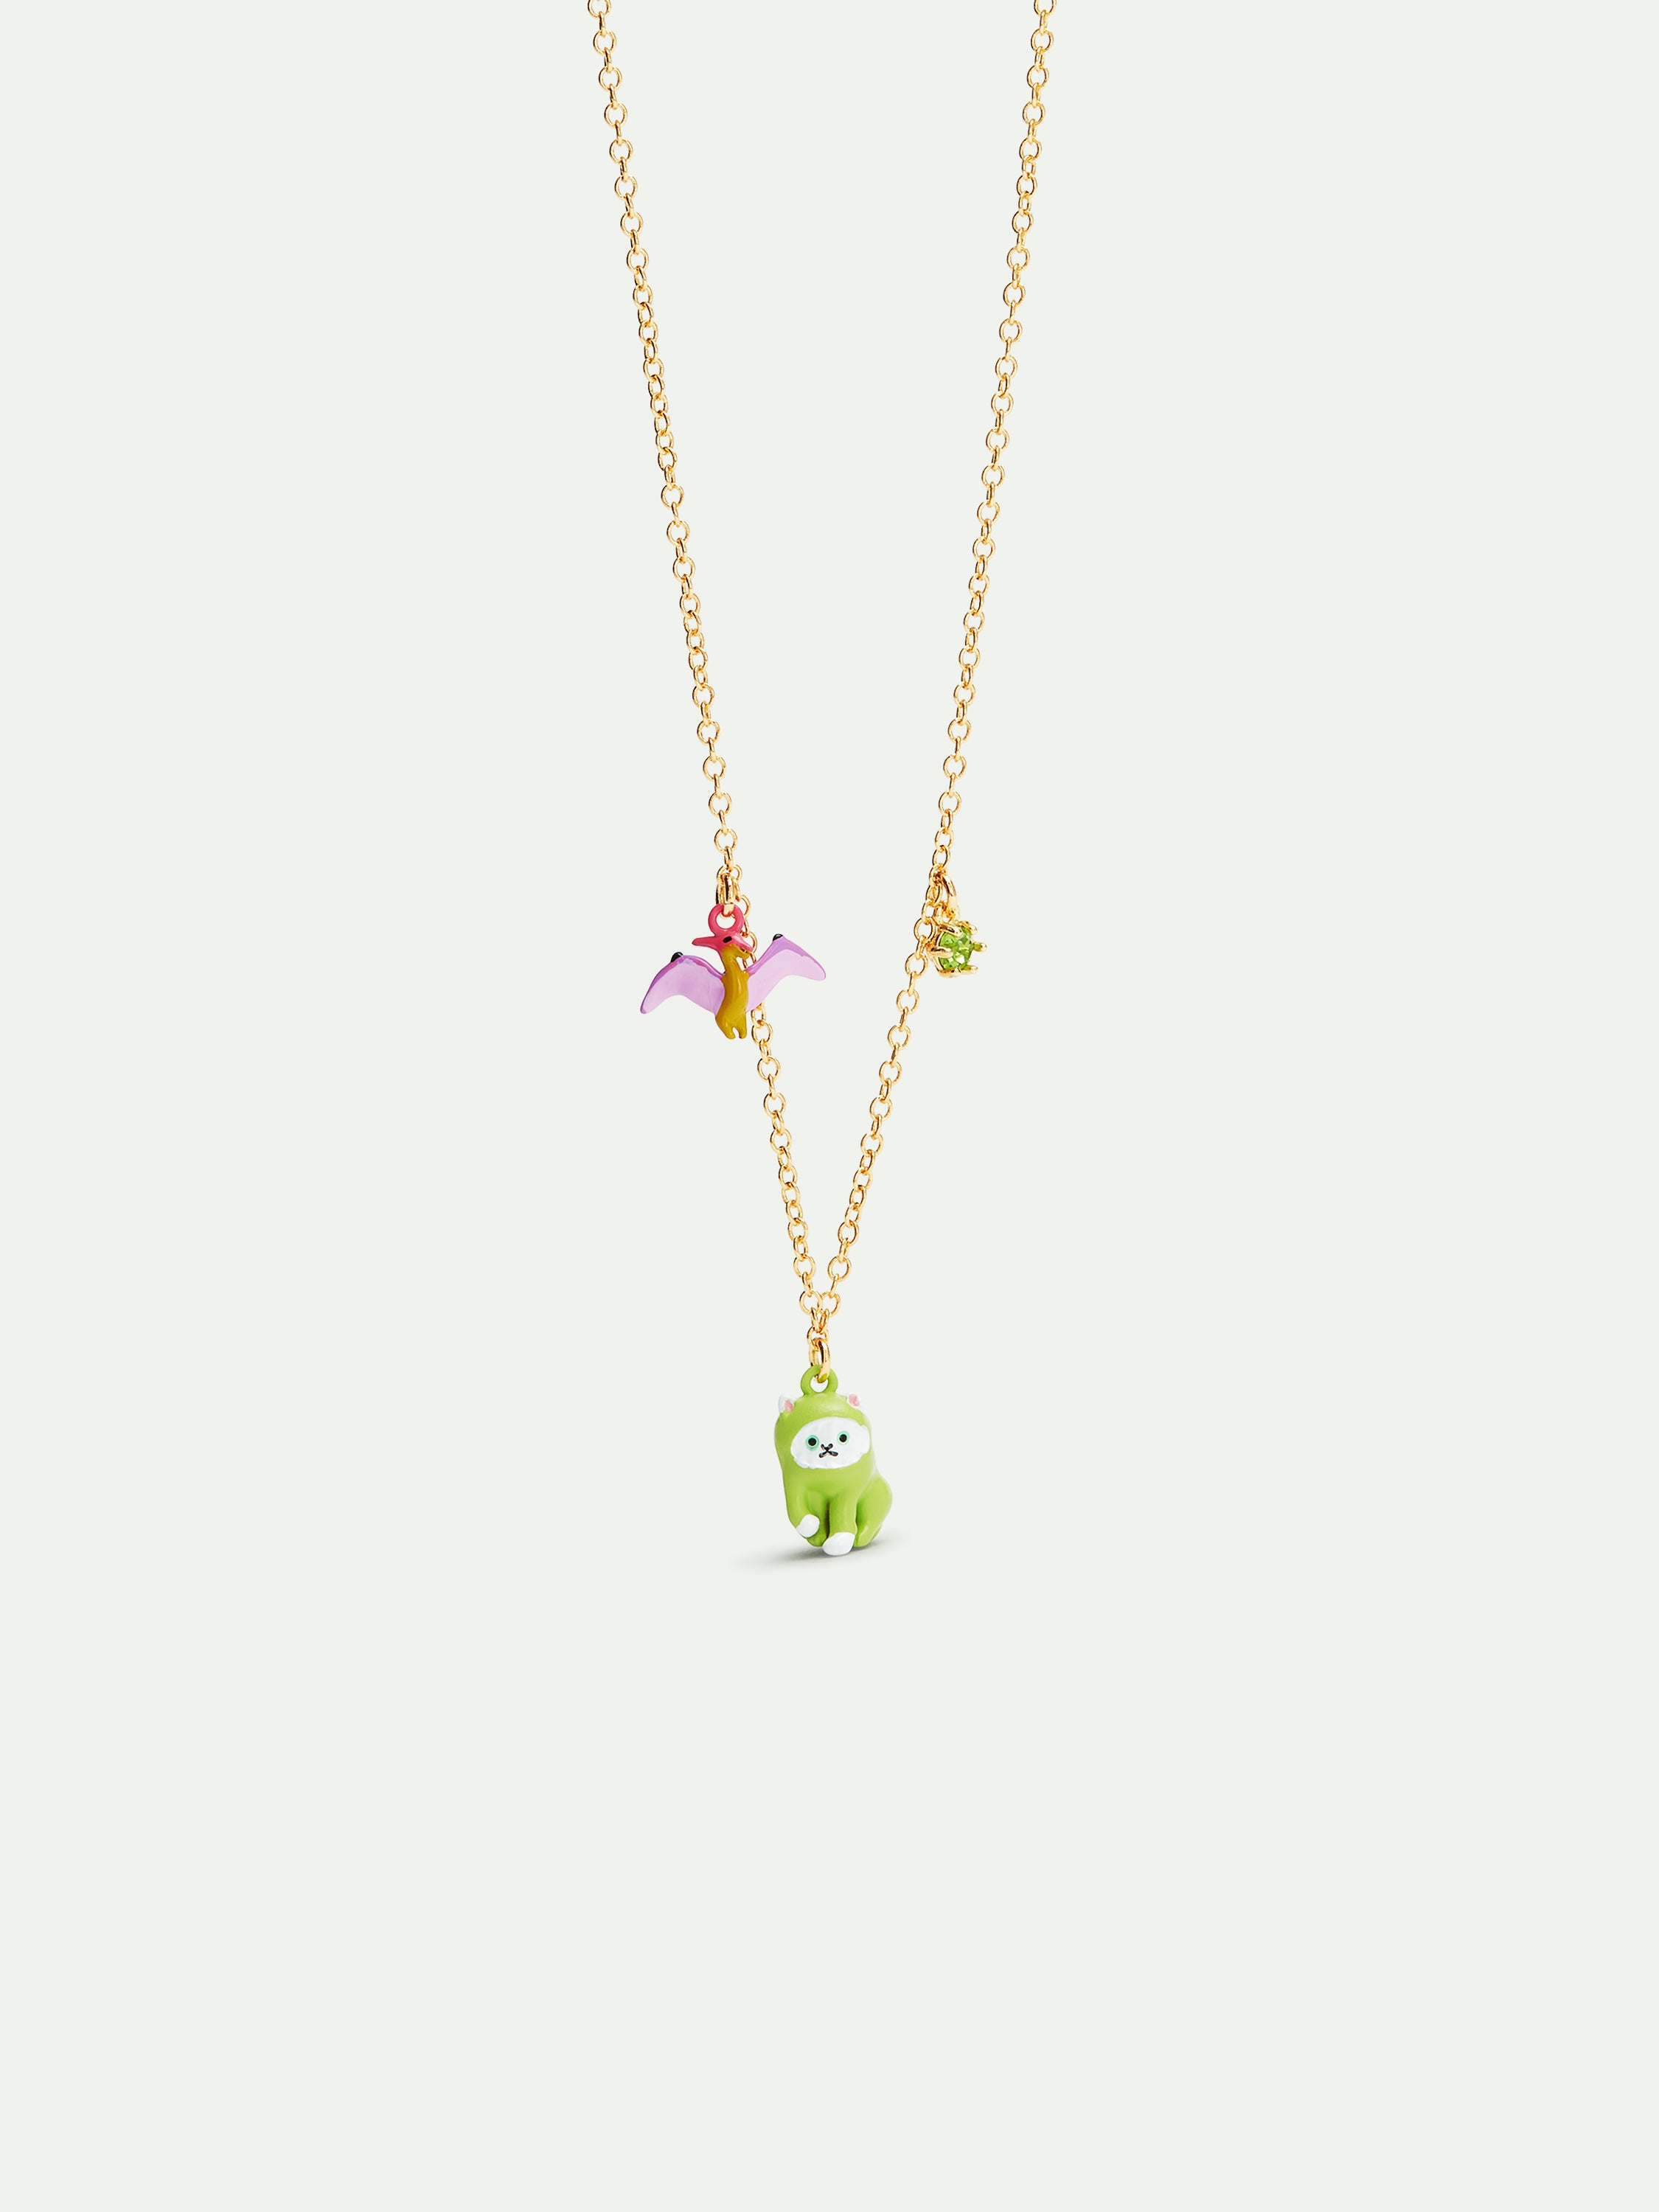 Dinosaur and dragon pendant necklace